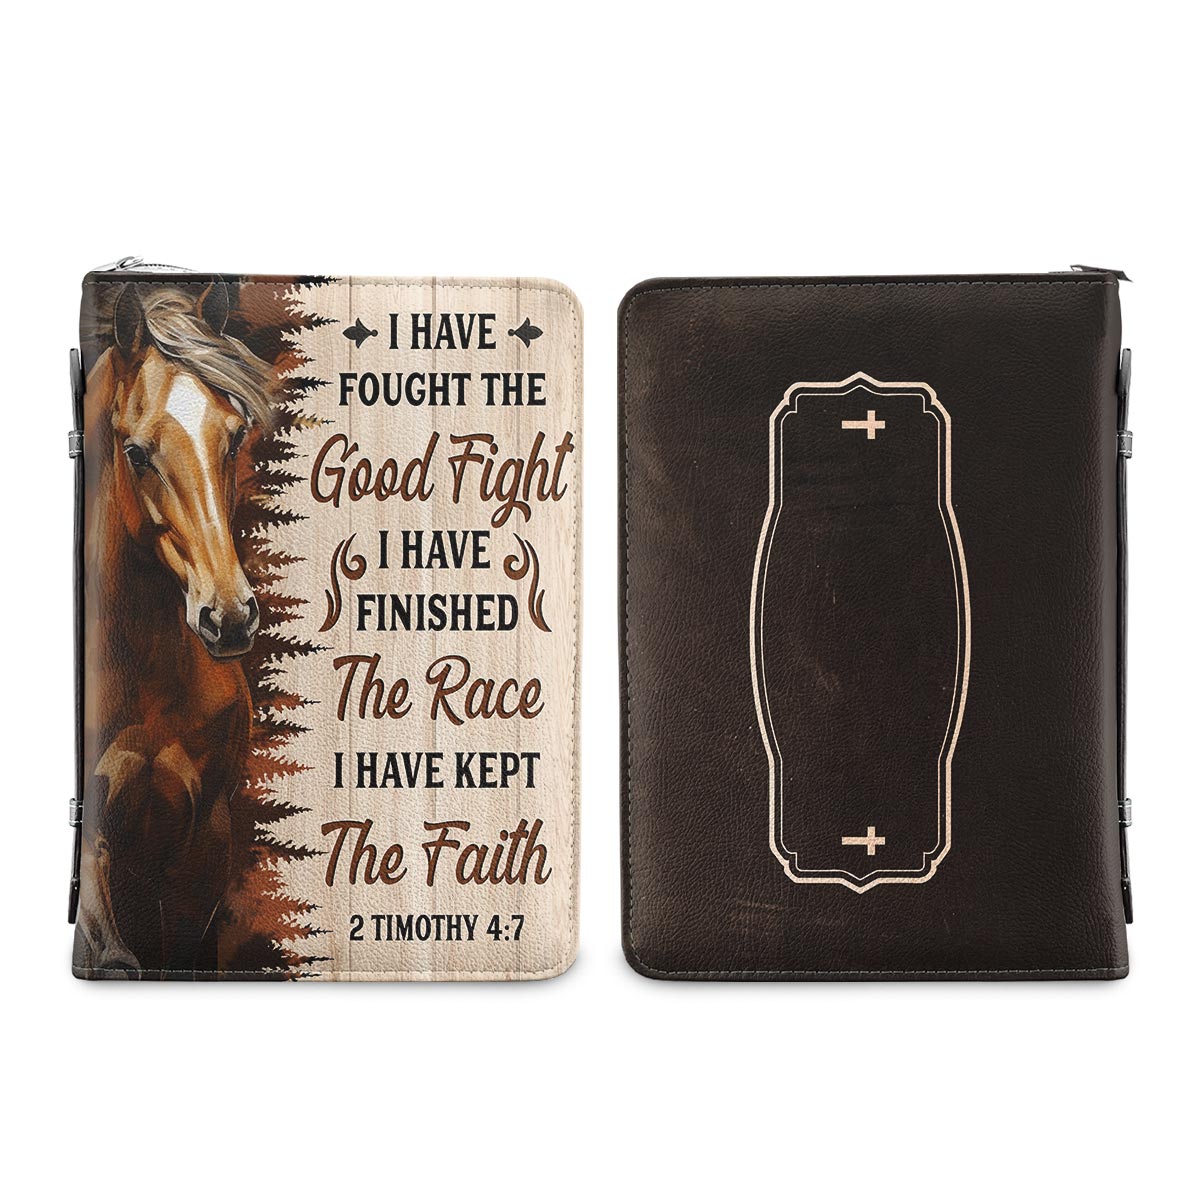 I Have Fought The Good Fight I Have Finished The Race I Have Kept The Faith 1 Timothy 4 7 Personalized Bible Covers For Women Personalized Cover